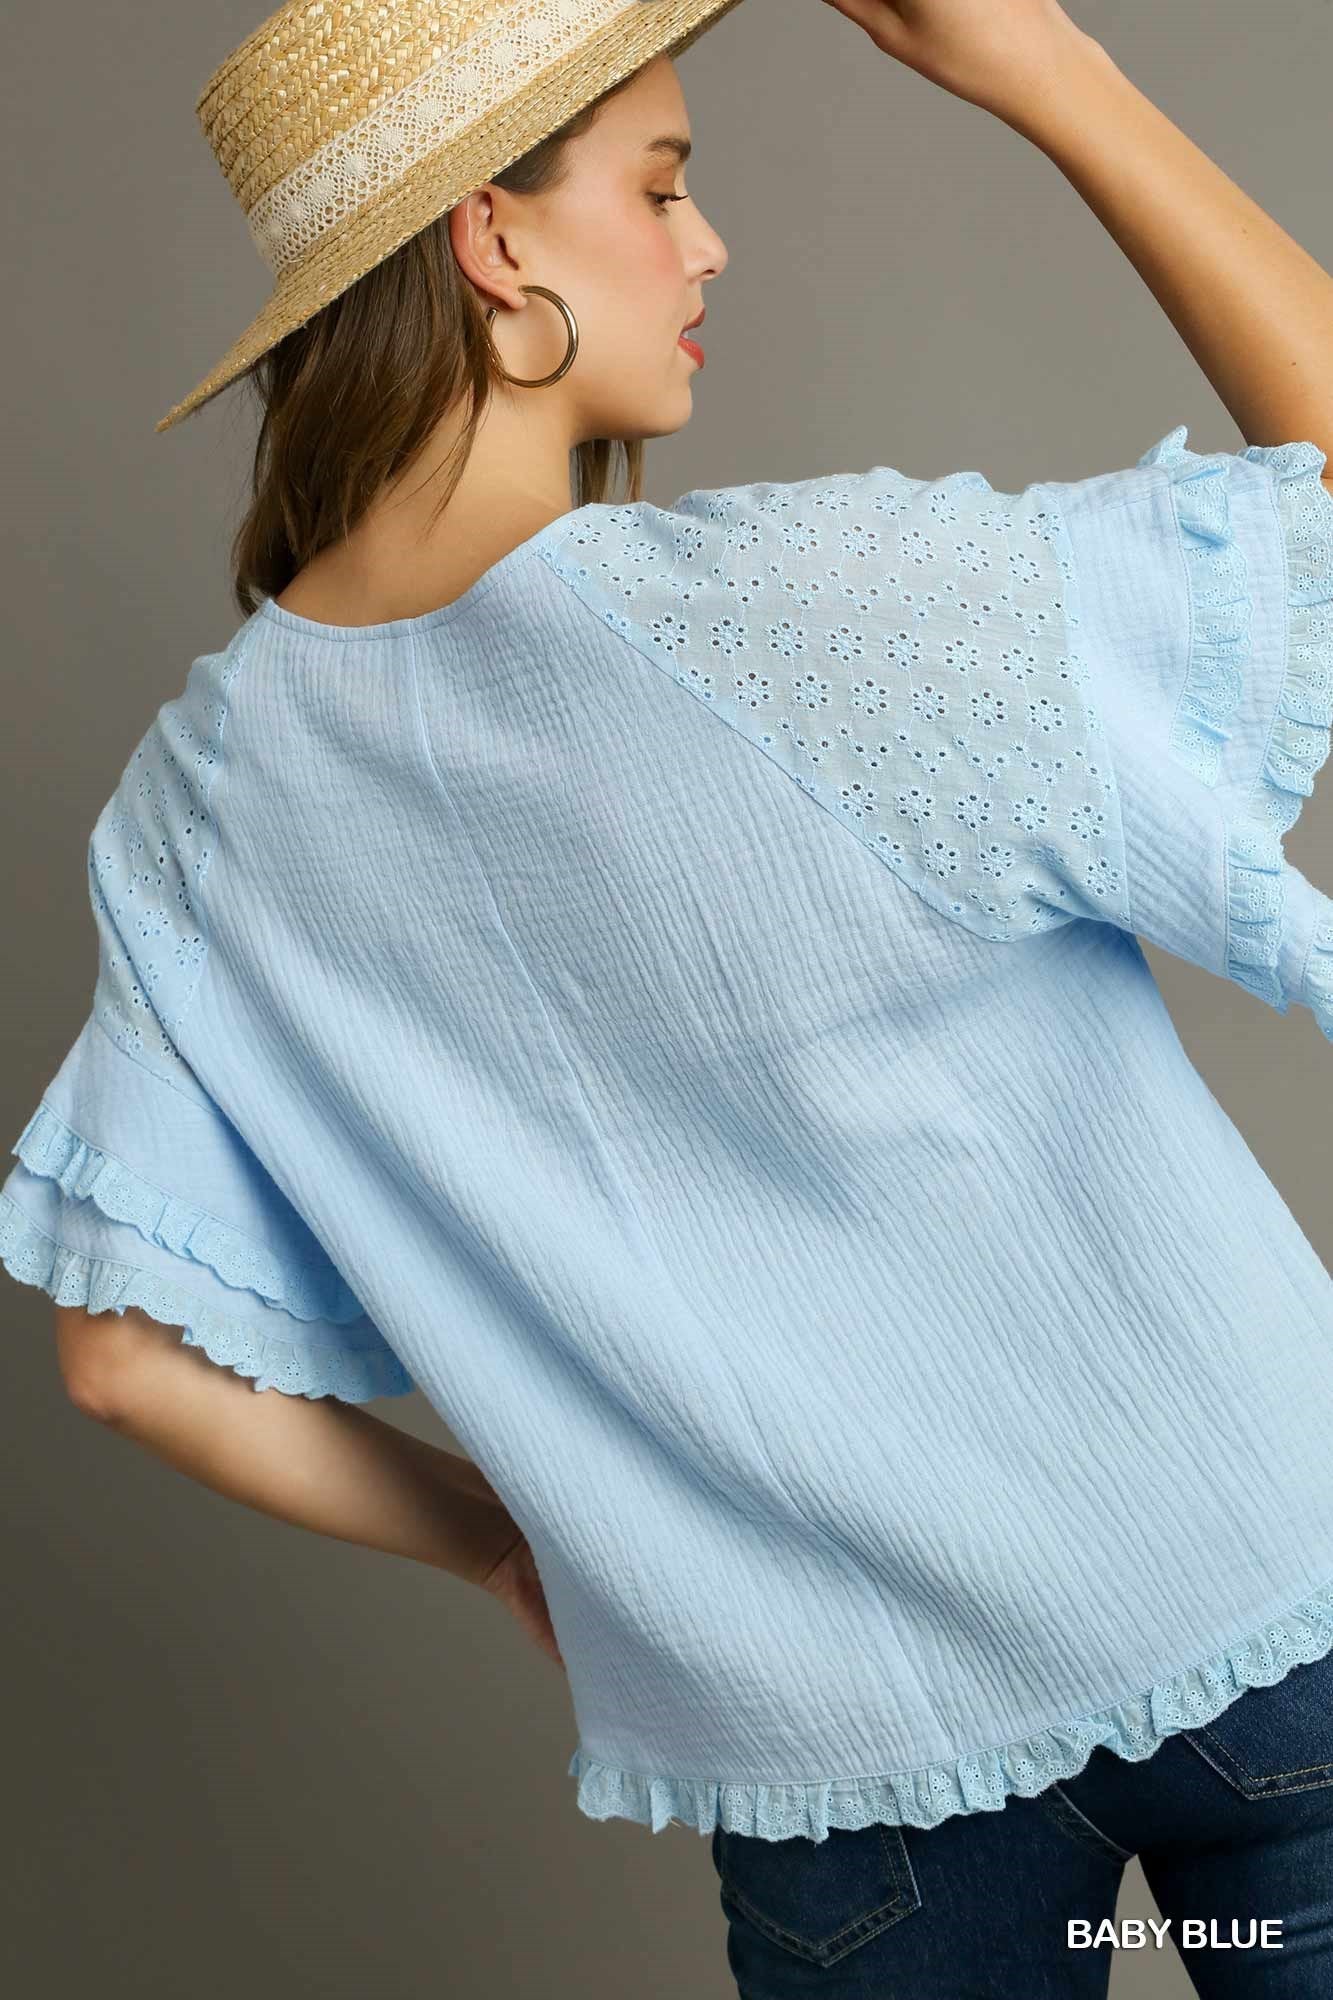 Baby Blue is for Boys Cotton Gauze Top